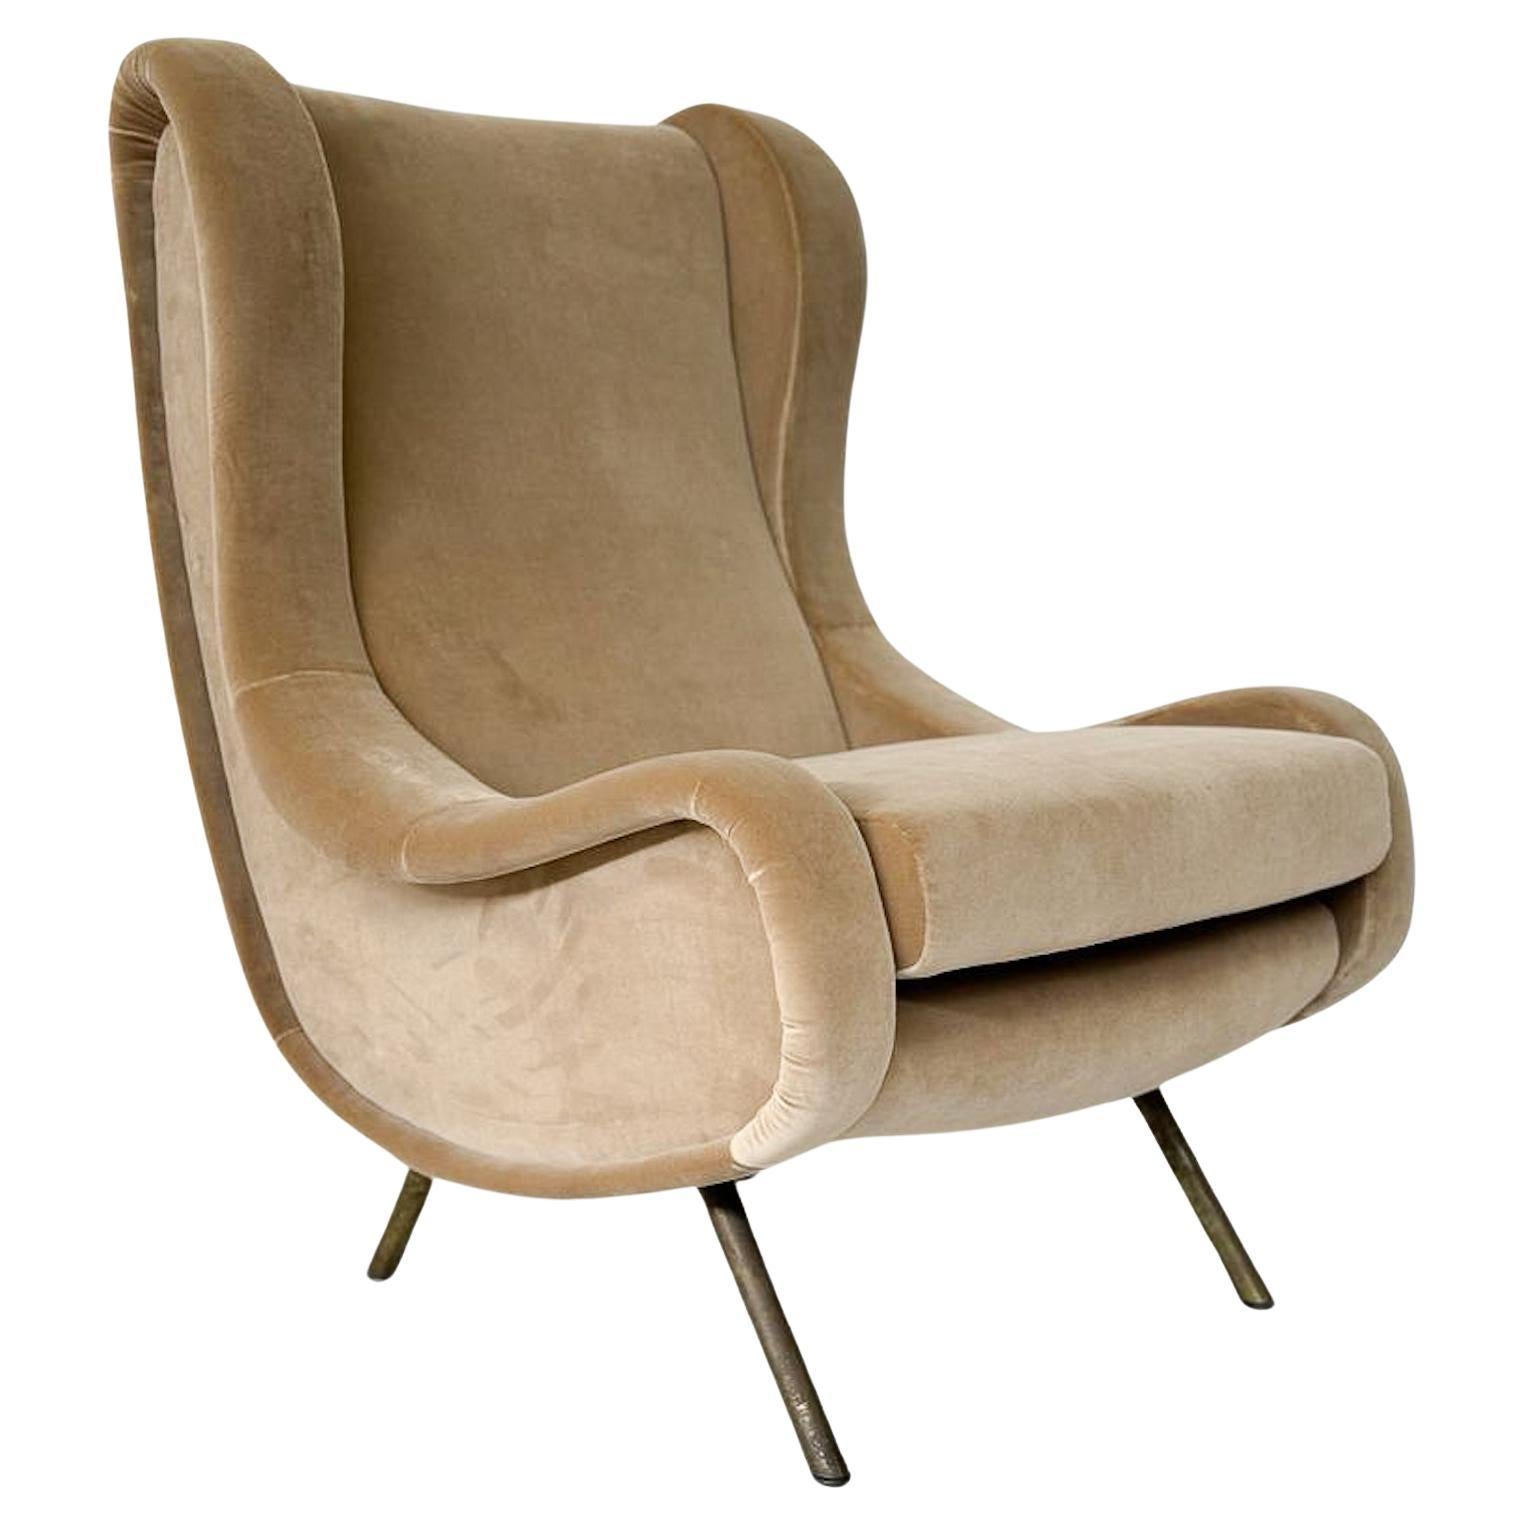 Mid-Century Modern Armchair by Marco Zanuso, Italy, 1960s - New Upholstery For Sale